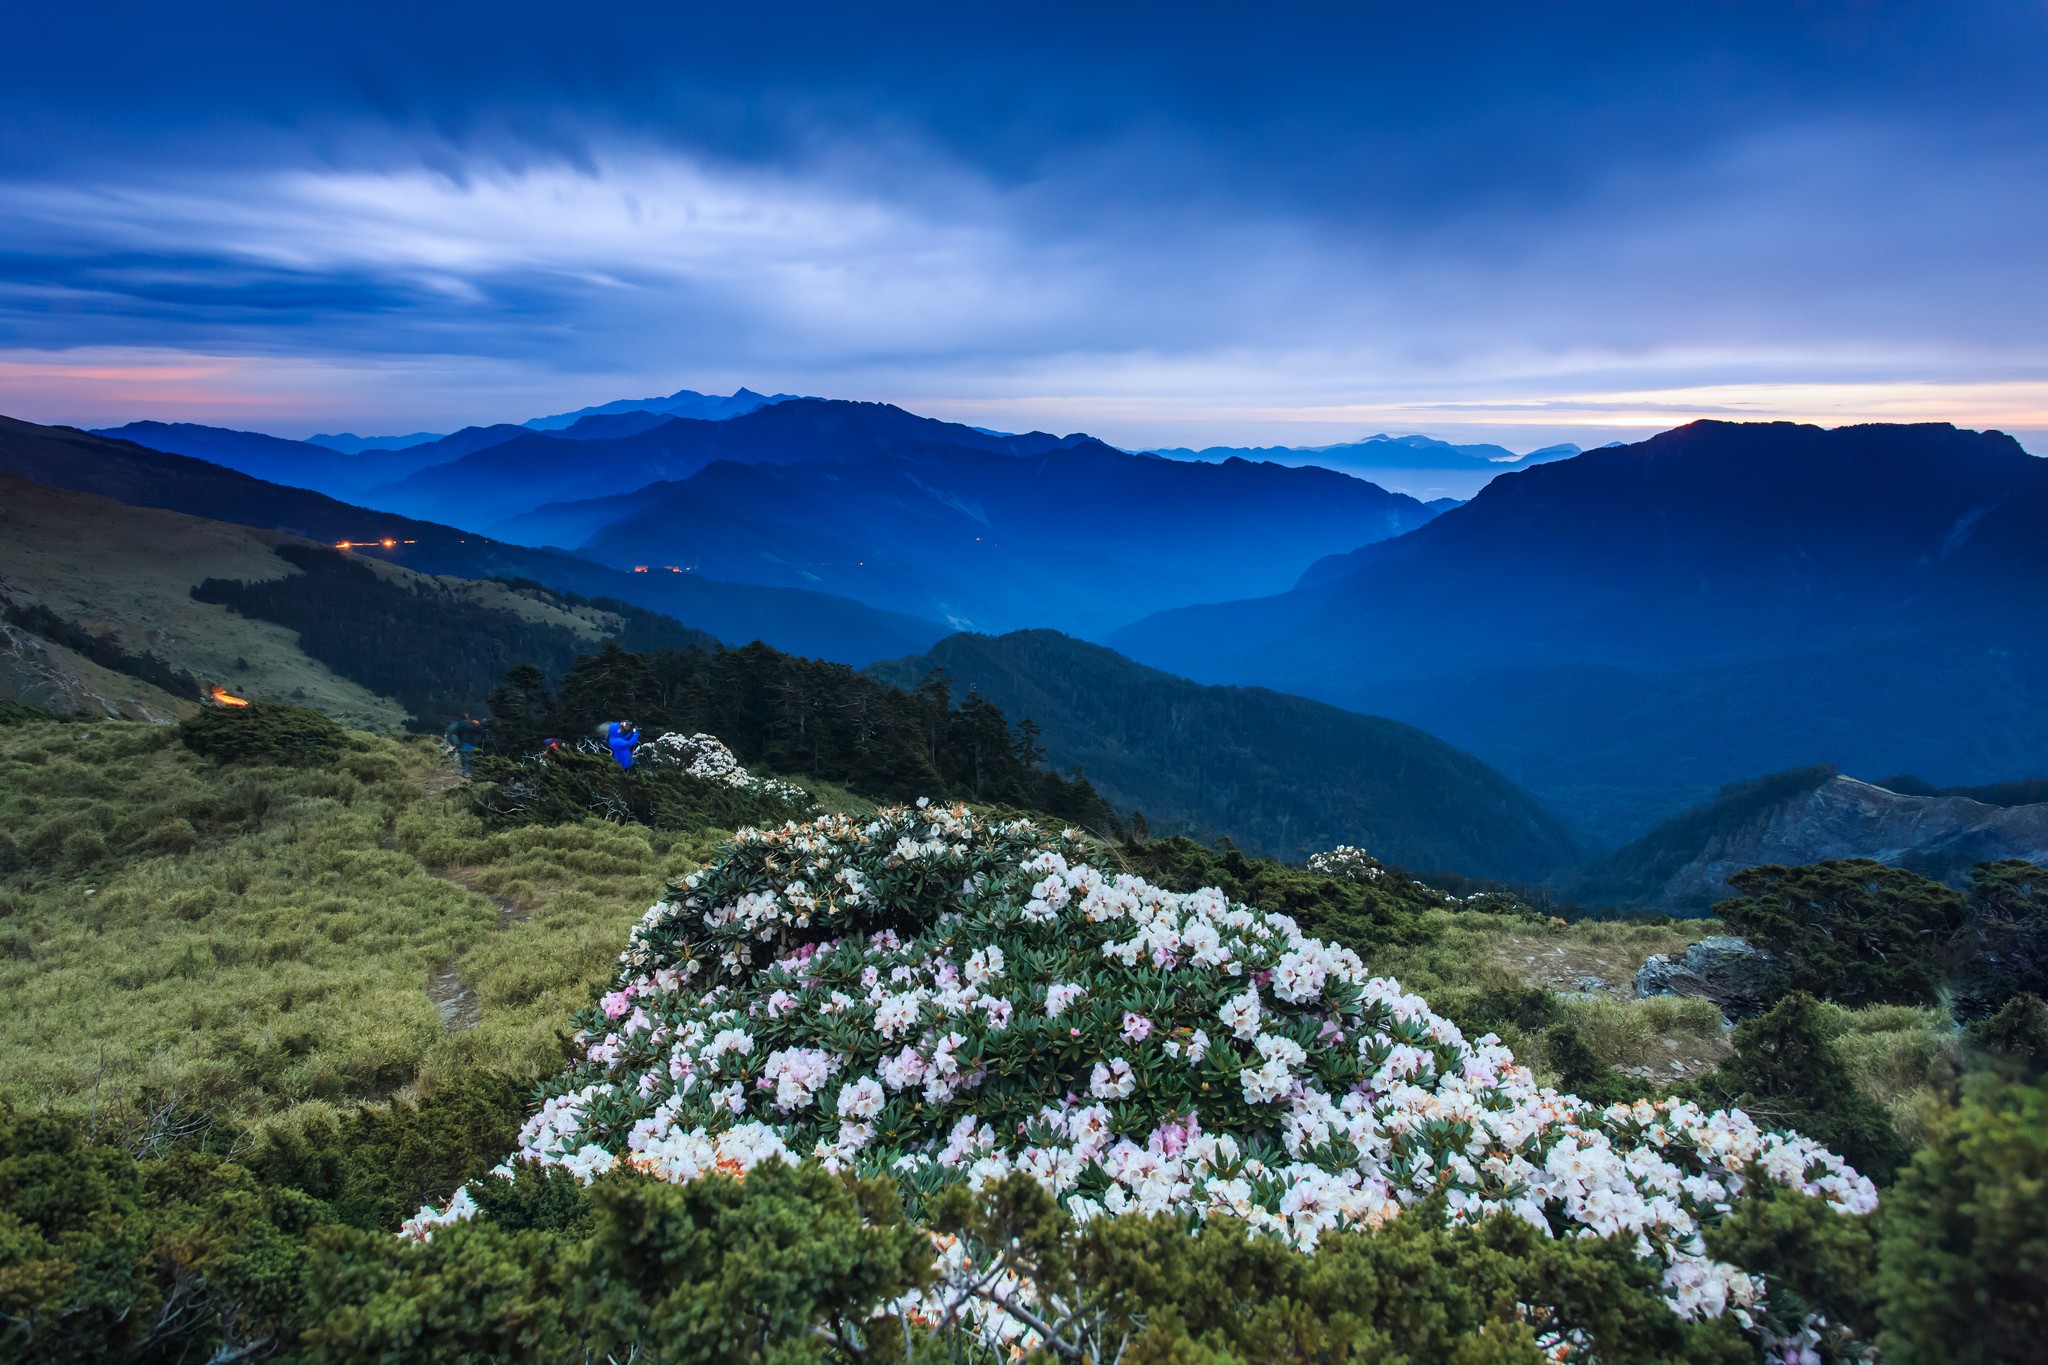 General 2048x1365 nature landscape photography flowers mountains